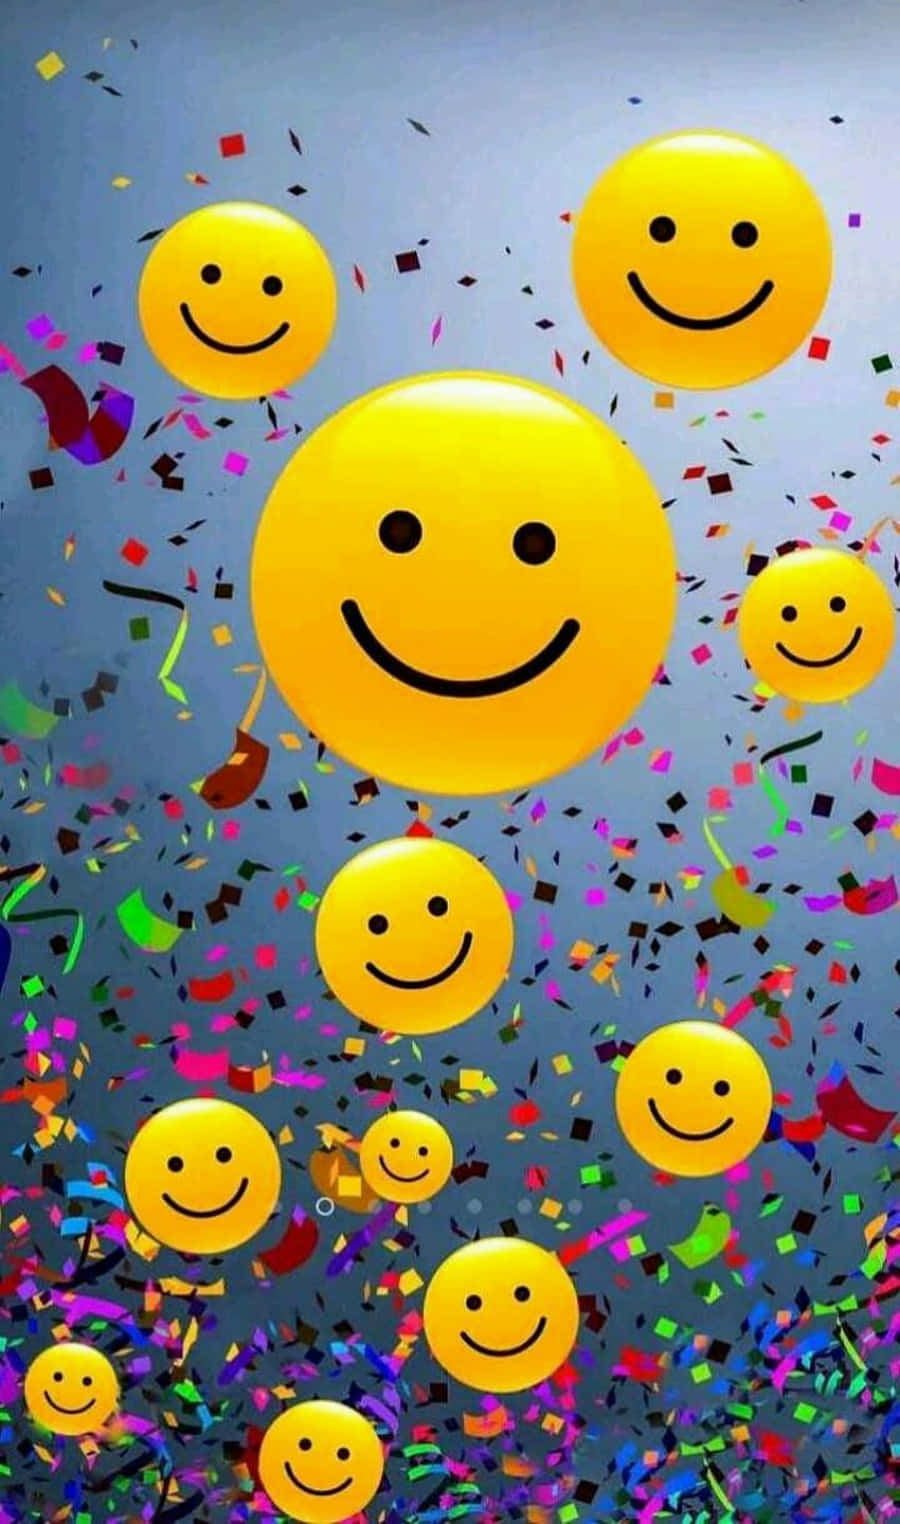 400+] Smiley Face Pictures | Wallpapers.com